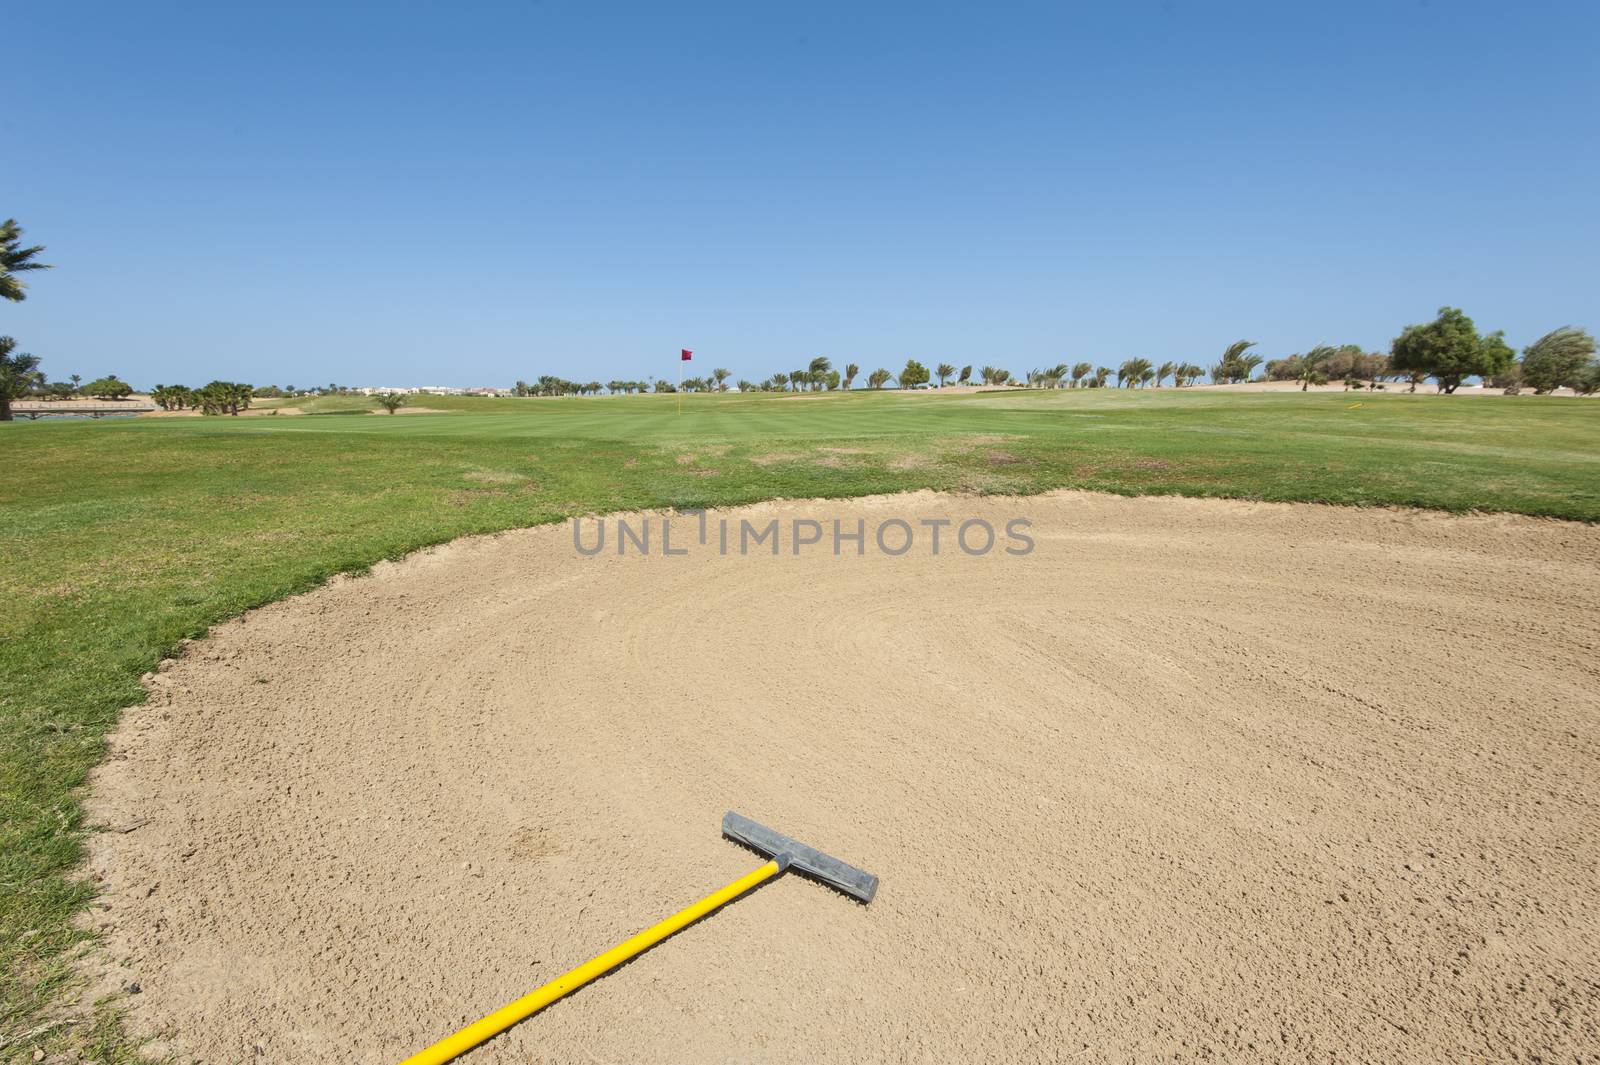 Bunker sand trap on a golf course with green in the distance